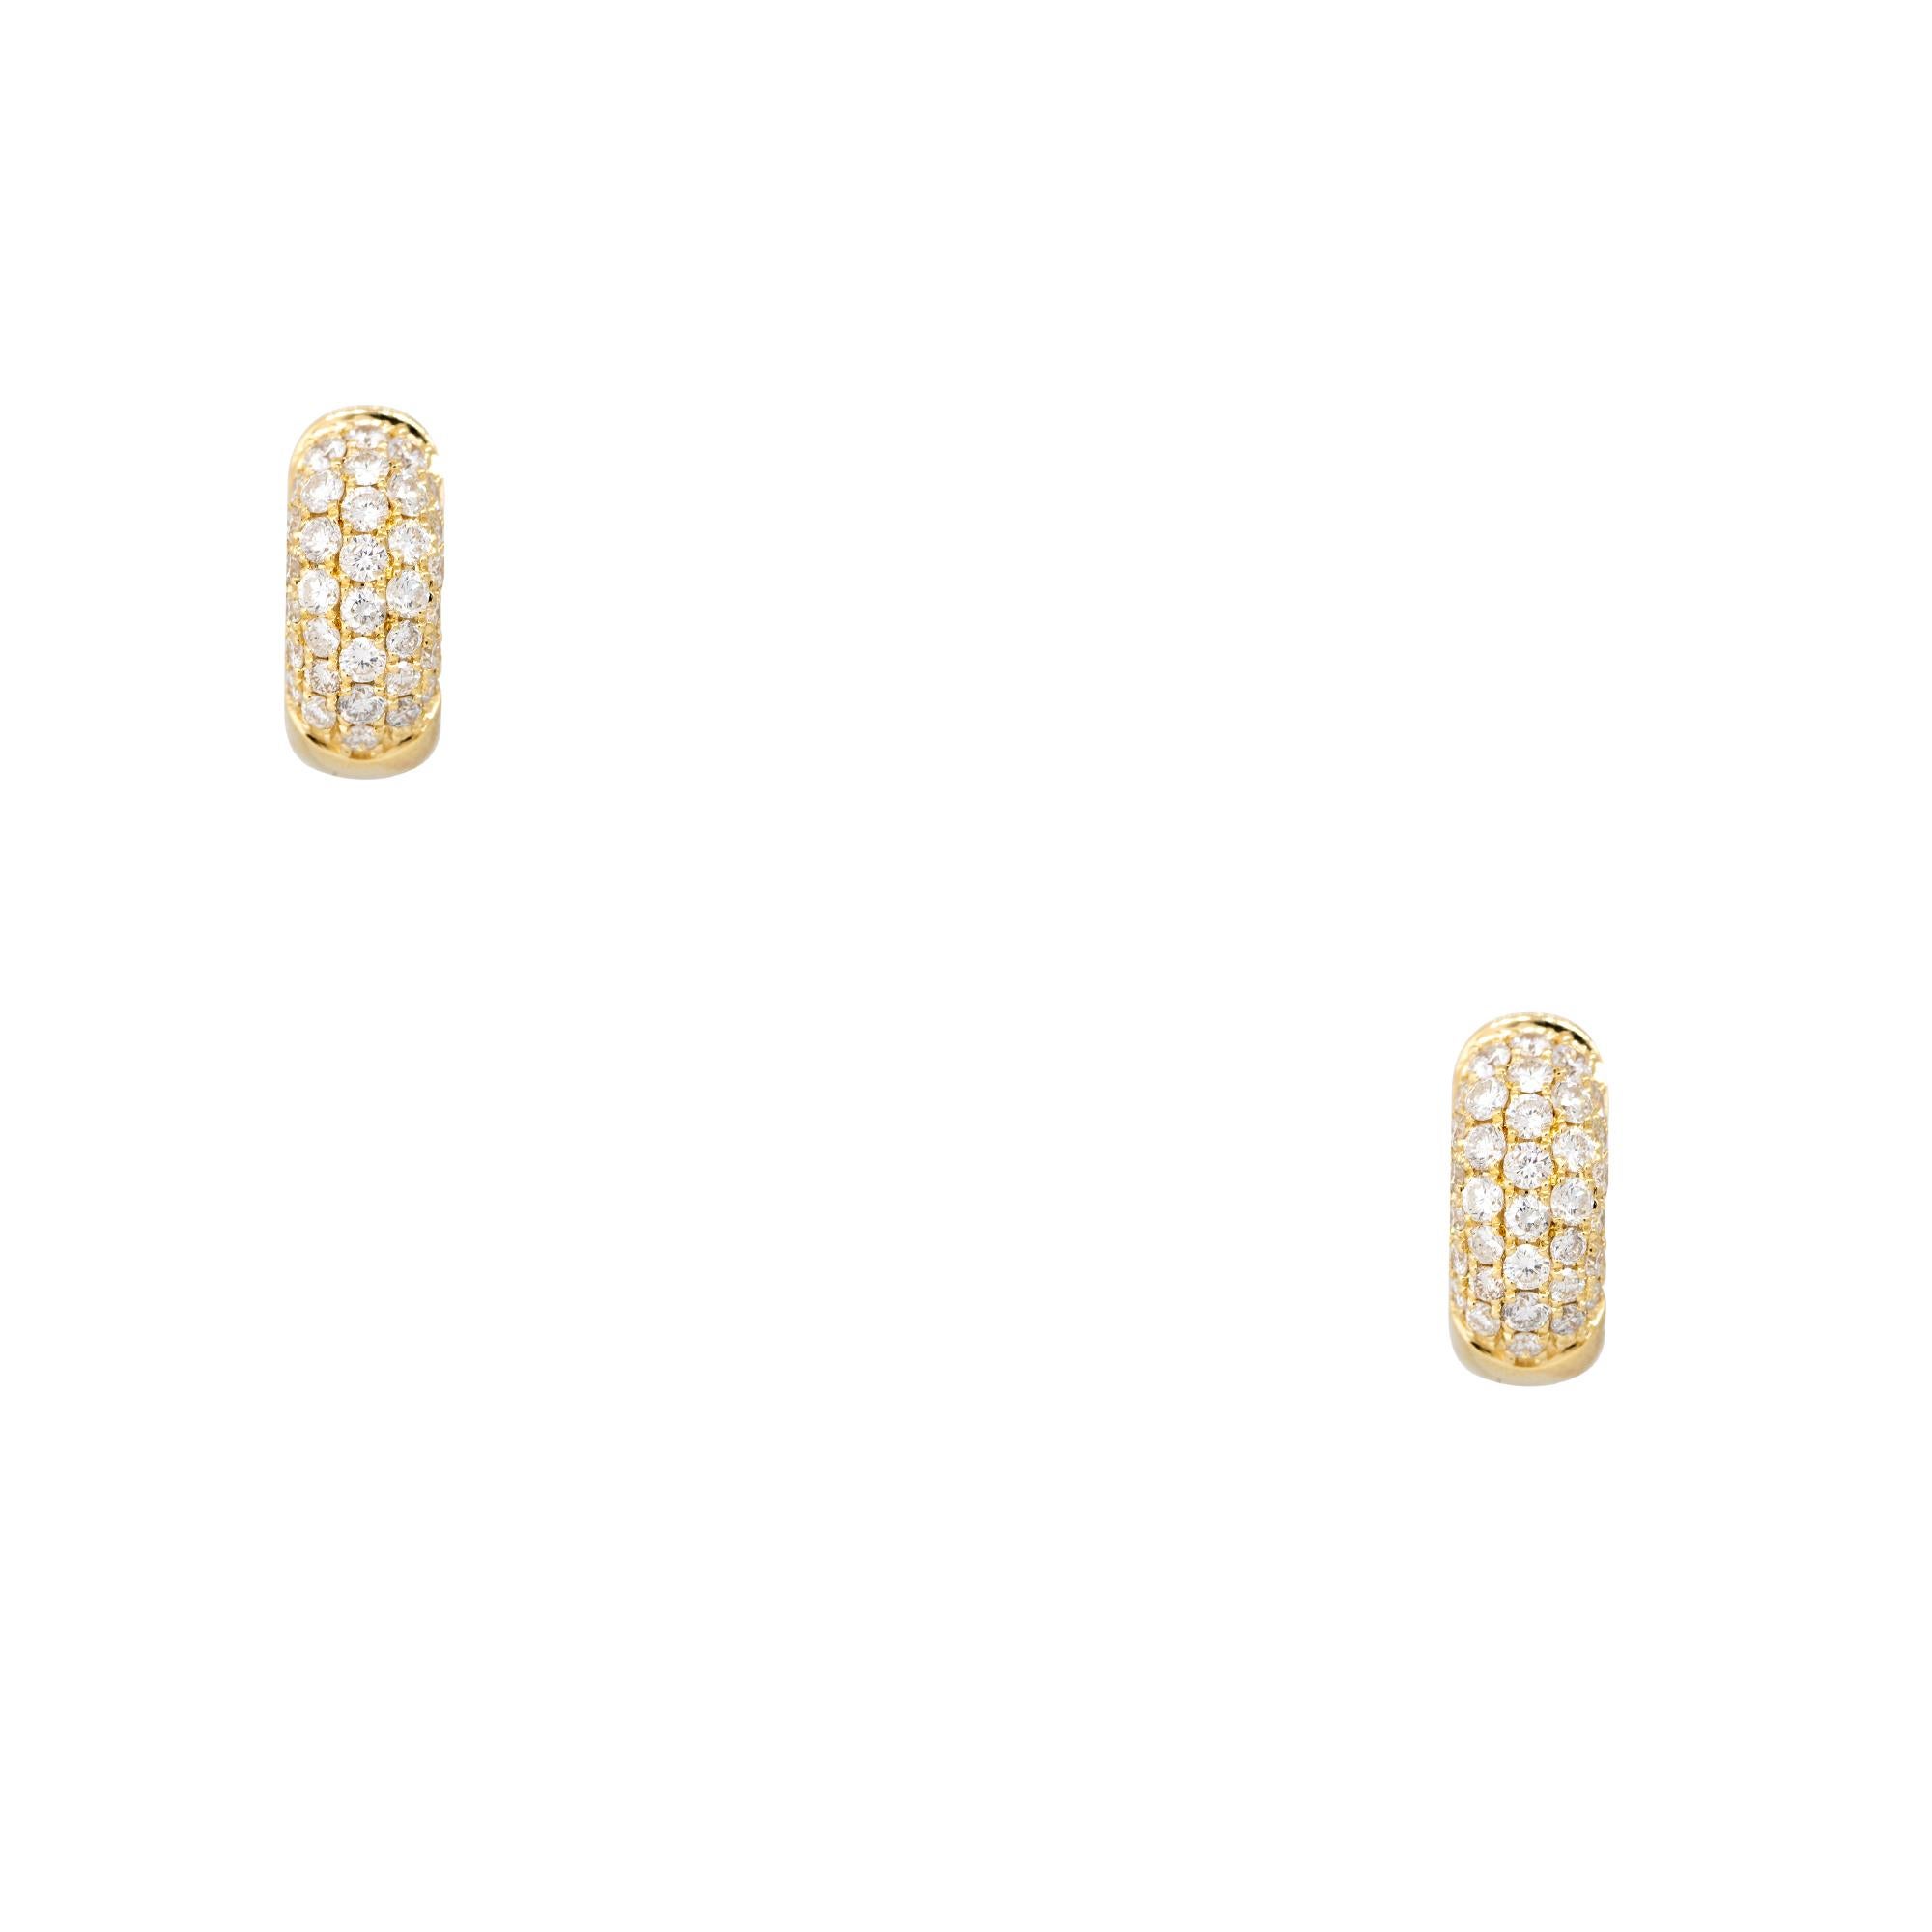 18k Yellow Gold 2ctw Pave Diamond Mini Huggie Hoop Earrings
Material: 18k Yellow Gold
Diamond Details: There are approximately 2.00 carats of Pave set, round brilliant cut diamonds. All diamonds are approximately G/H in color and approximately SI